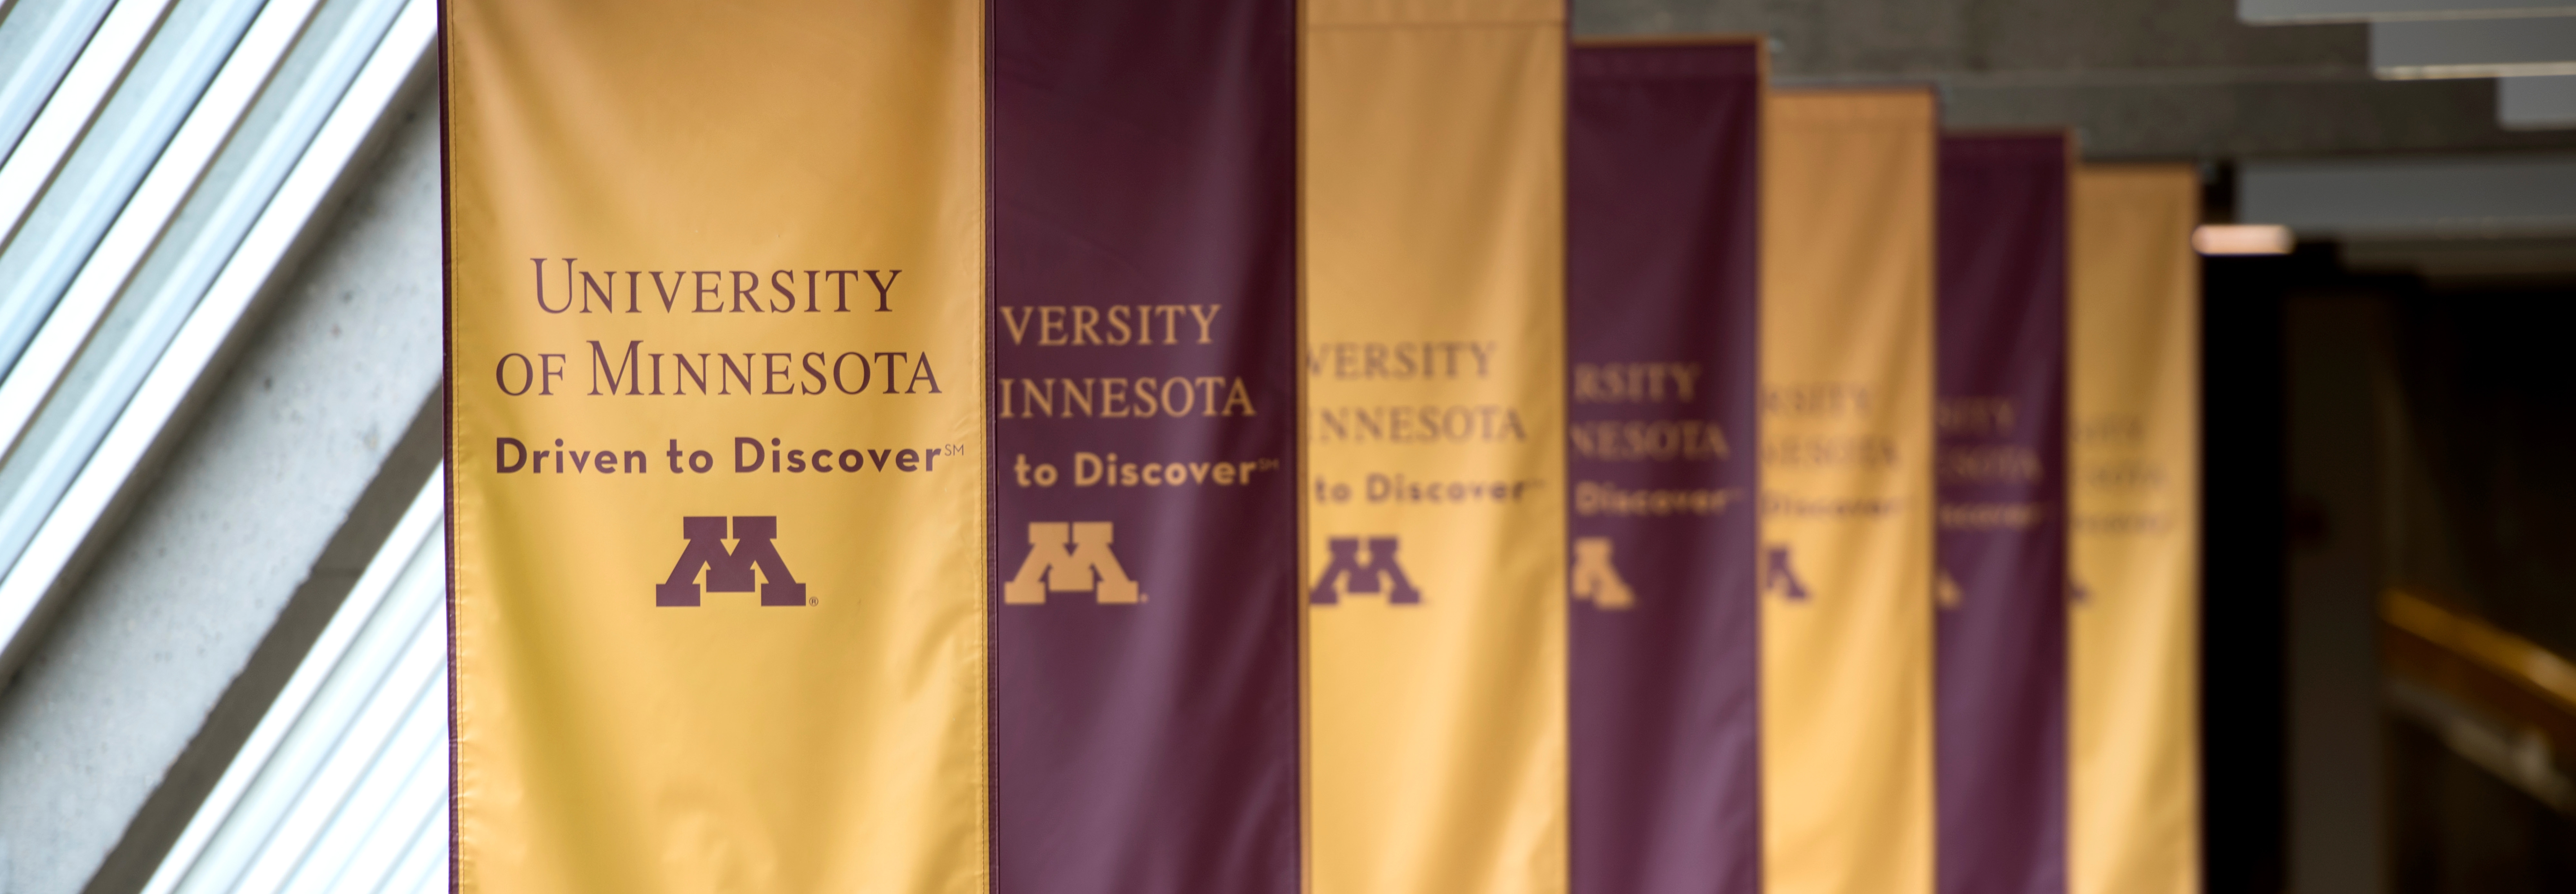 University of Minnesota - Driven to Discover Flags Hanging